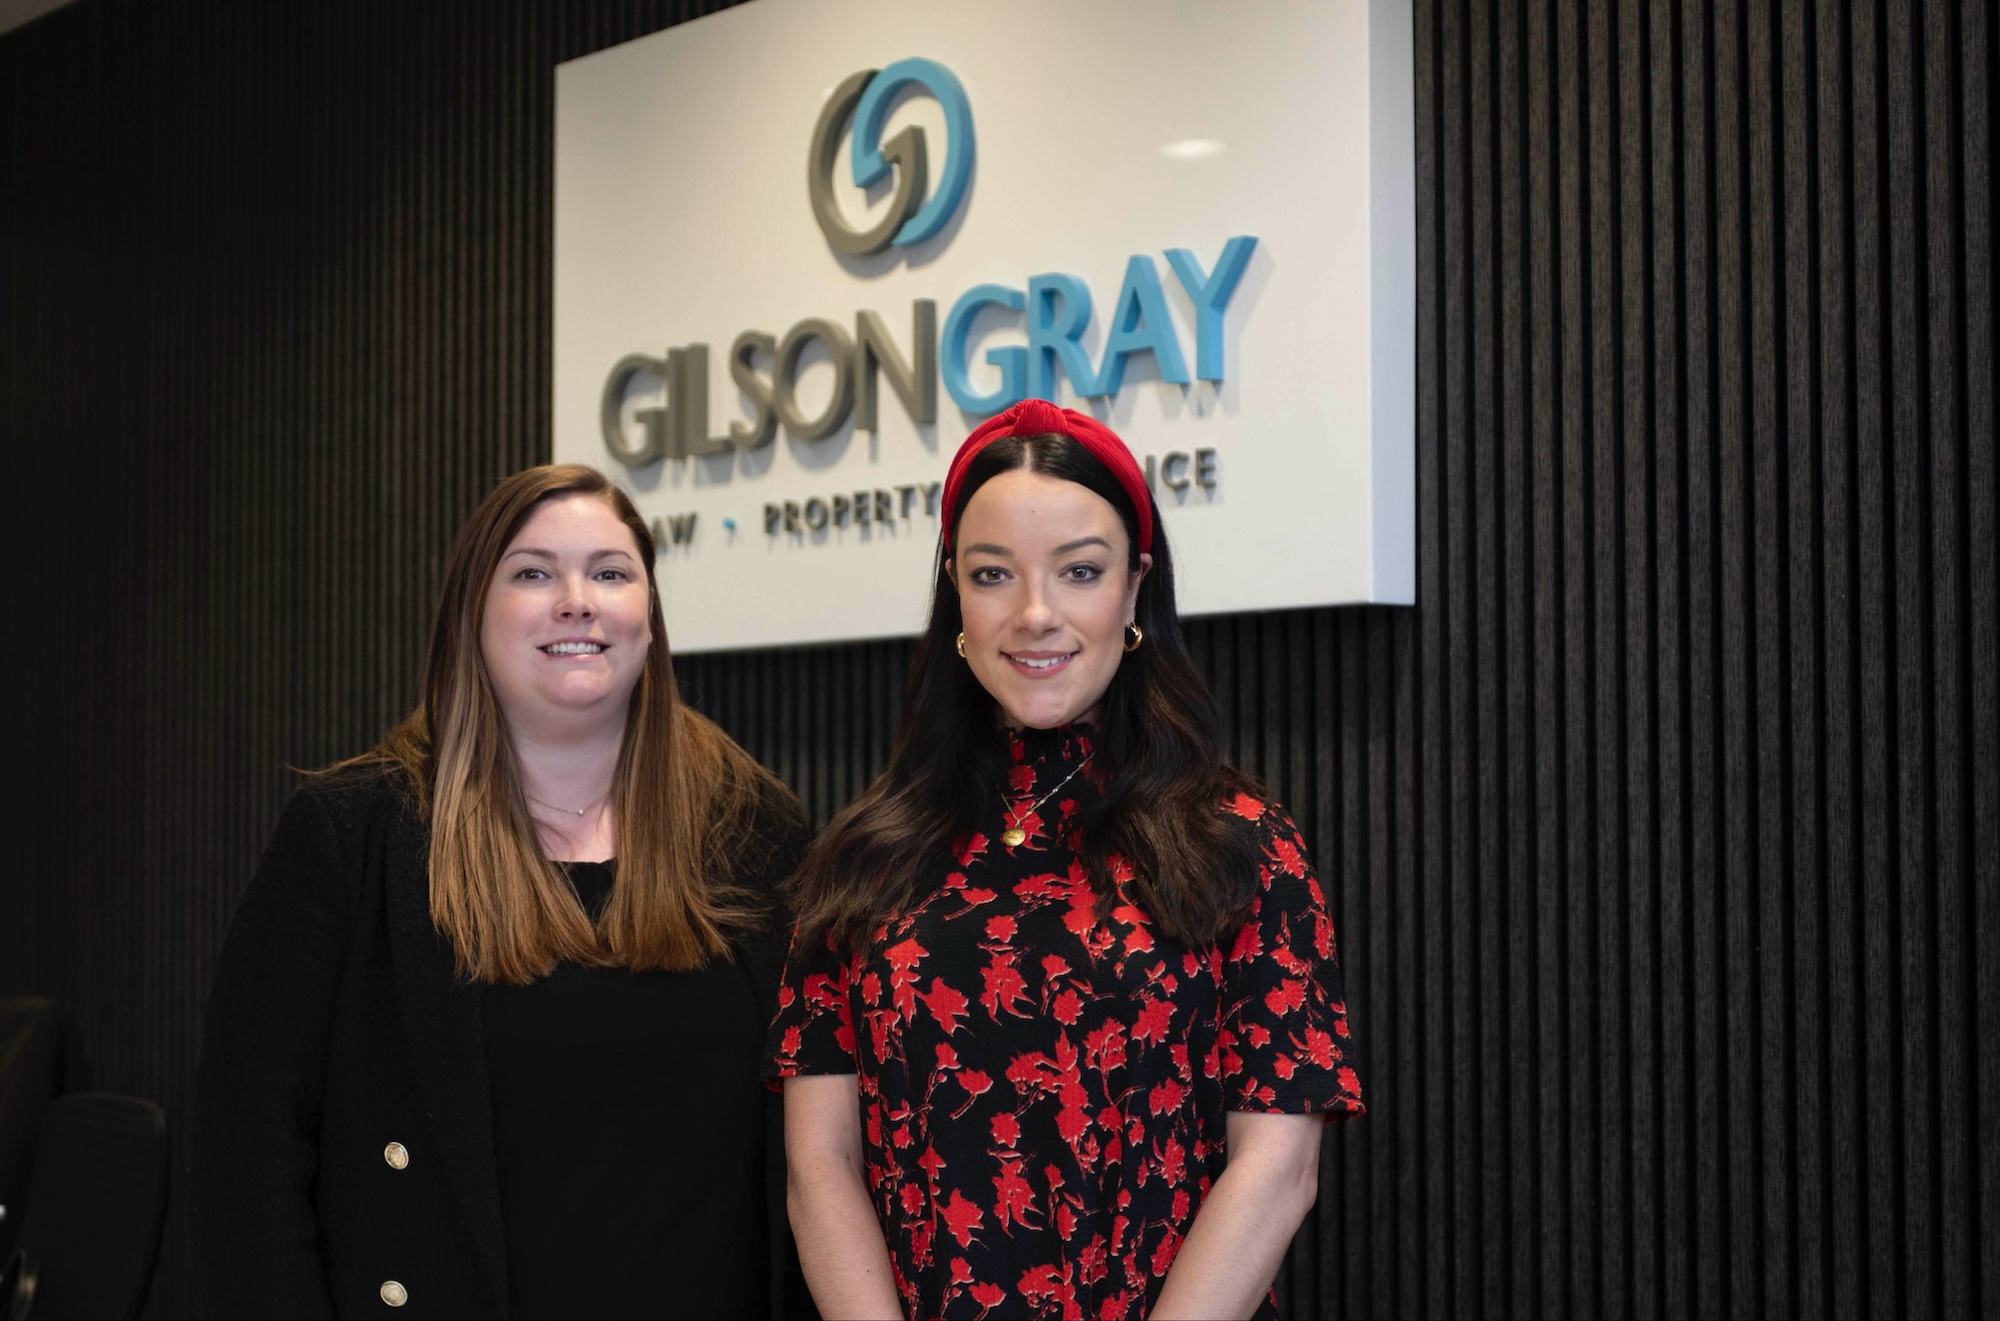 Gilson Gray welcomes new marketing and business development managers